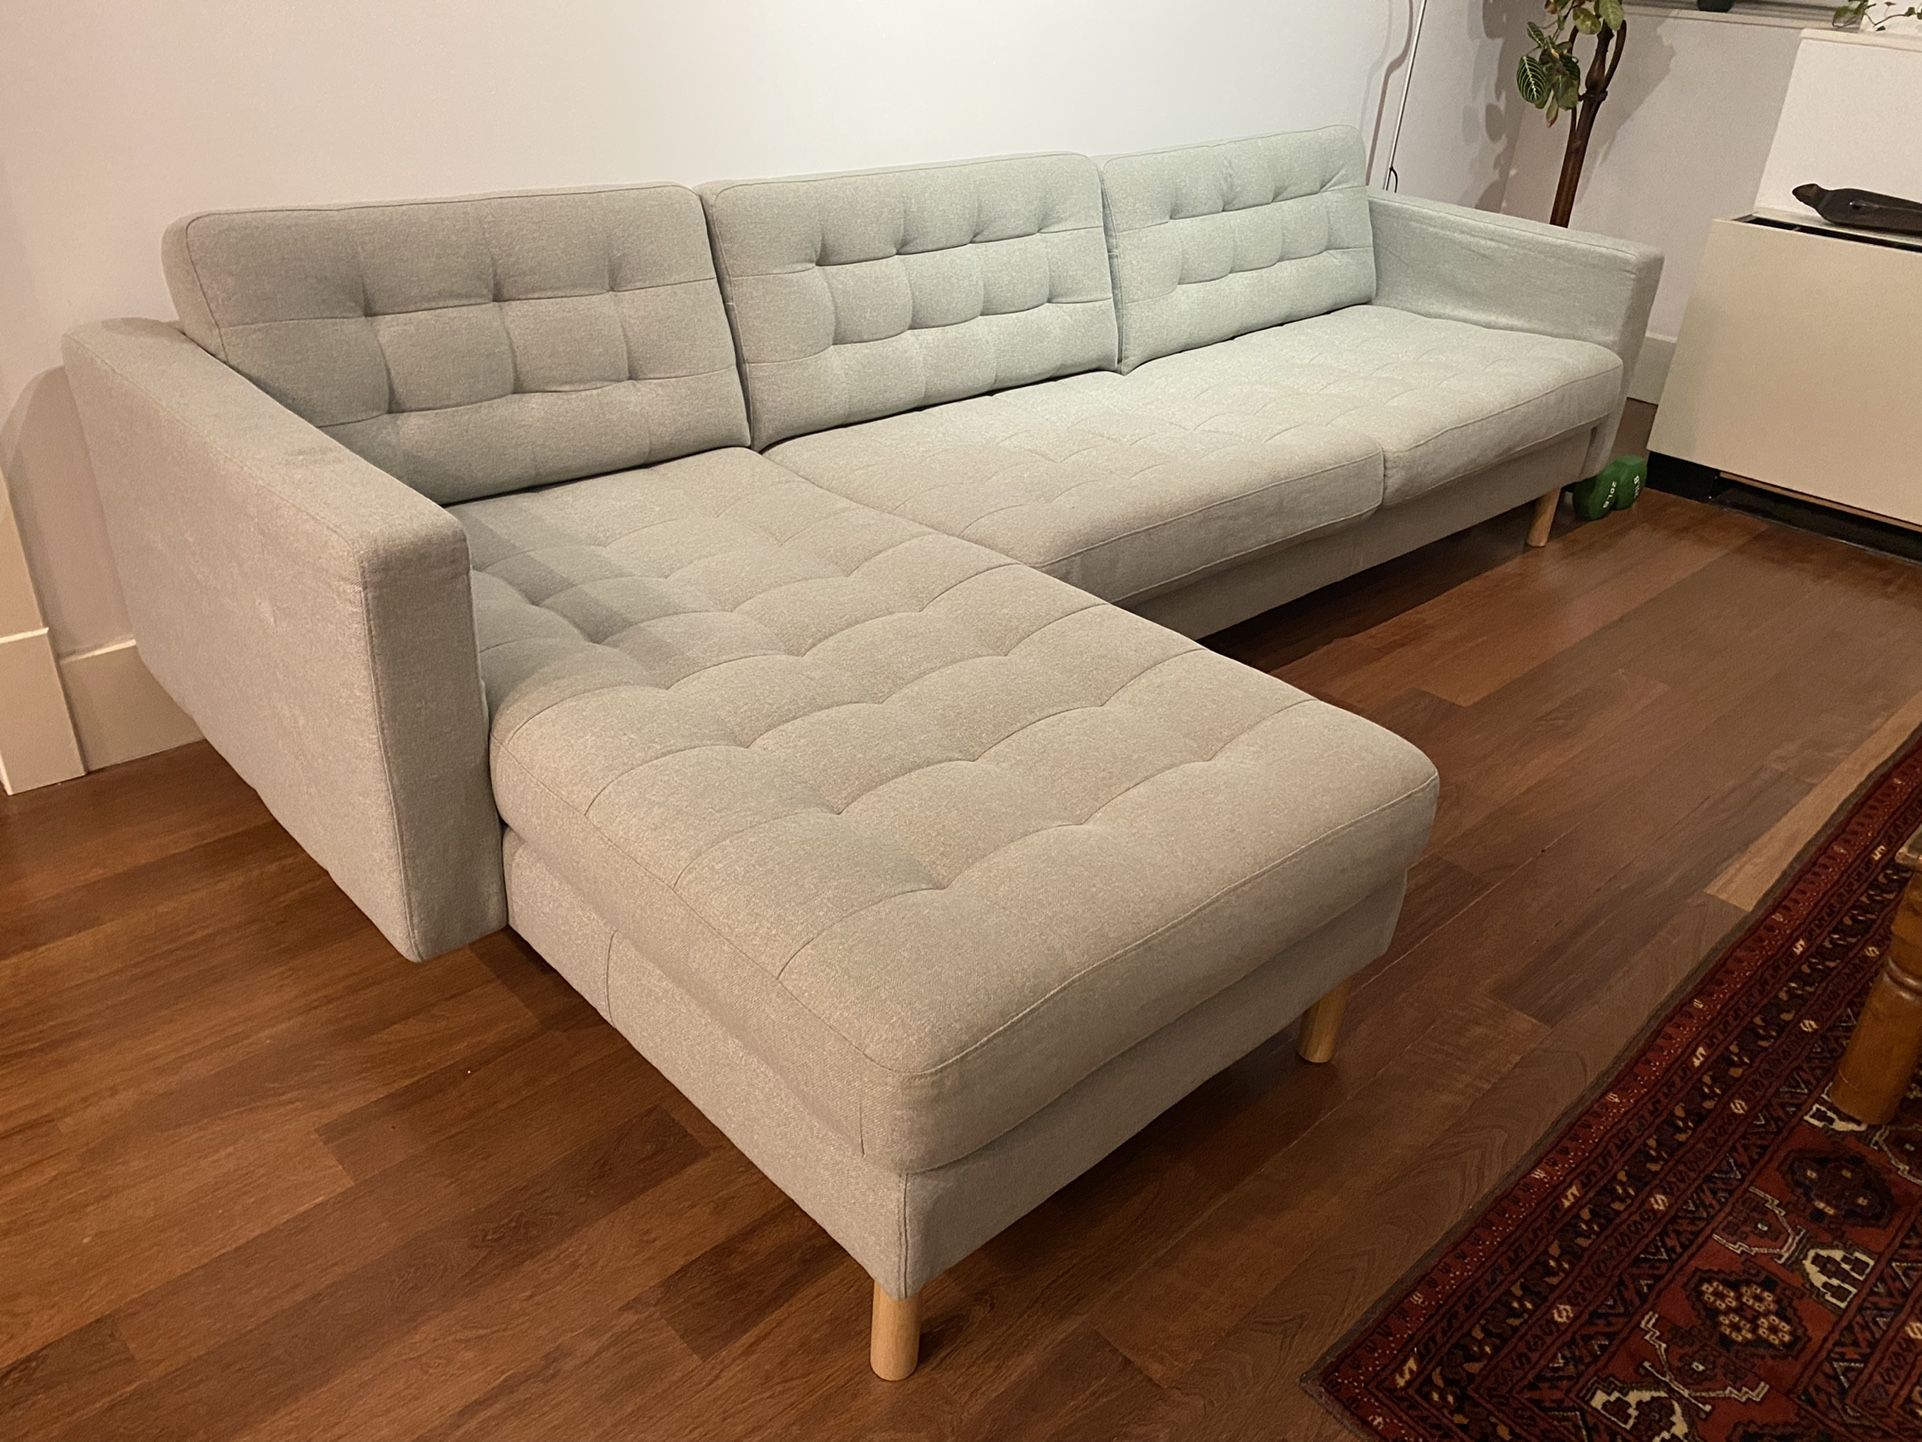 IKEA Morabo Sectional, 4 Seat Couch